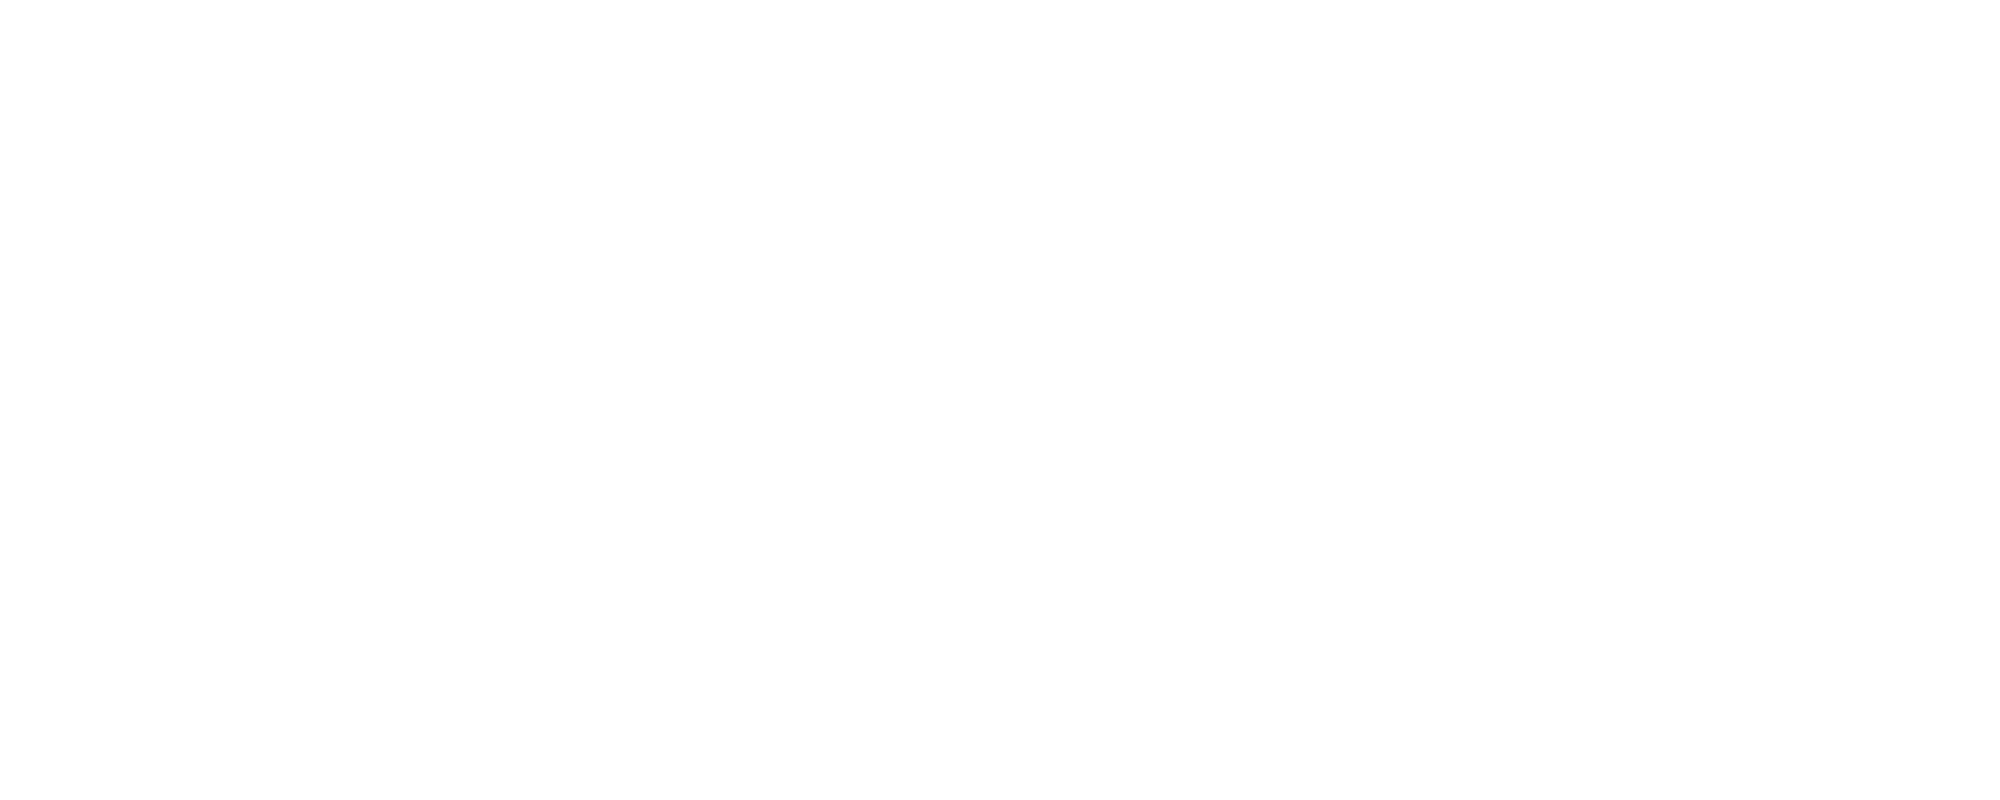 OVATION TV PARTNERS WITH CHARTER COMMUNICATIONS FOR FIFTH CONSECUTIVE YEAR OF STAND FOR THE ARTS AWARDS